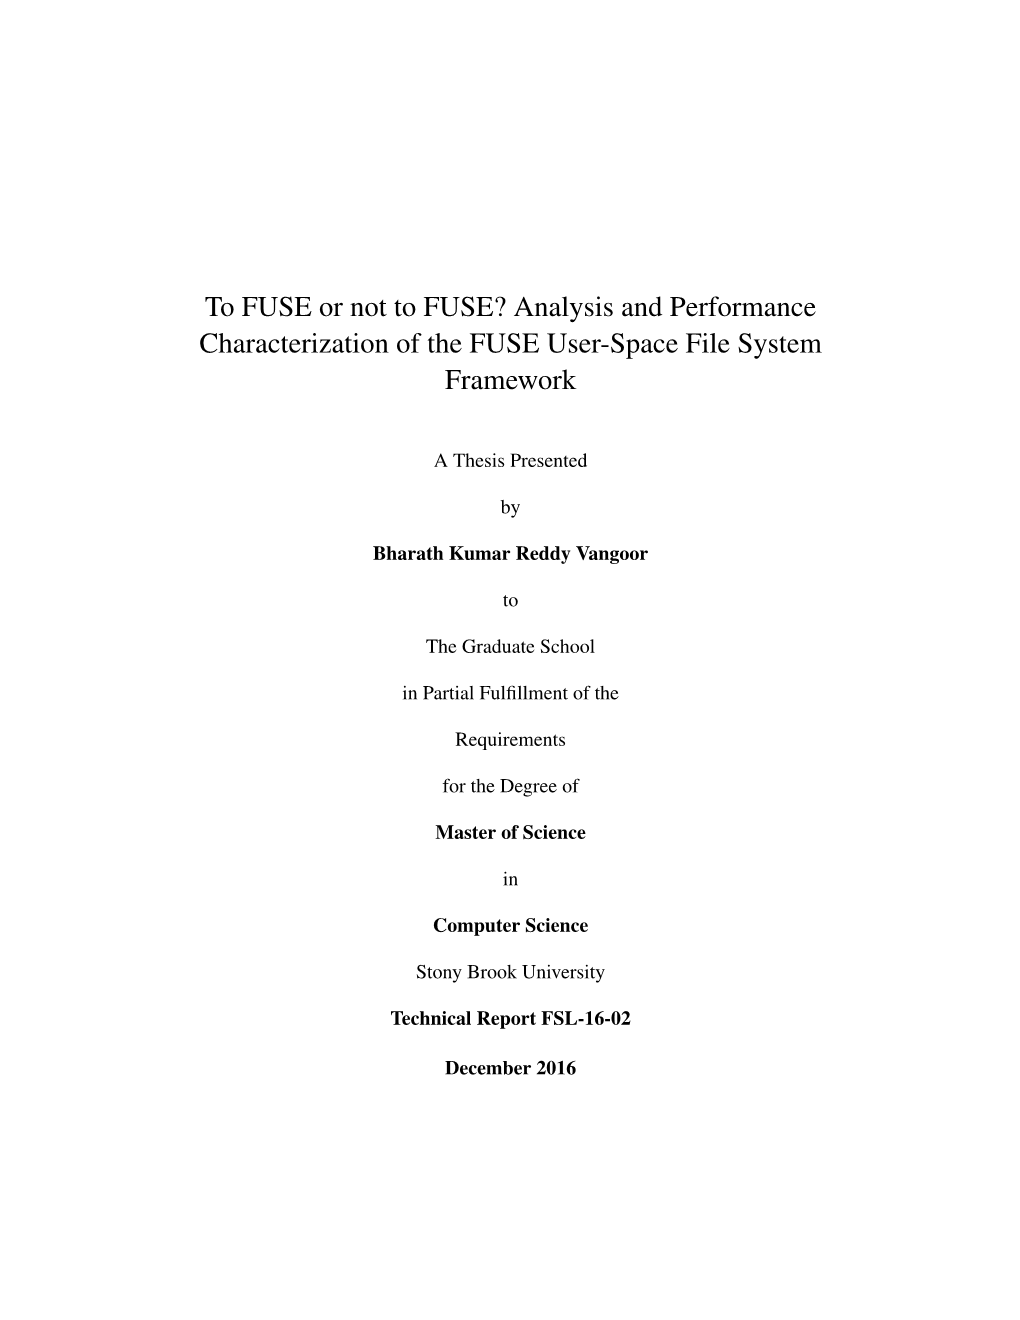 To FUSE Or Not to FUSE? Analysis and Performance Characterization of the FUSE User-Space File System Framework